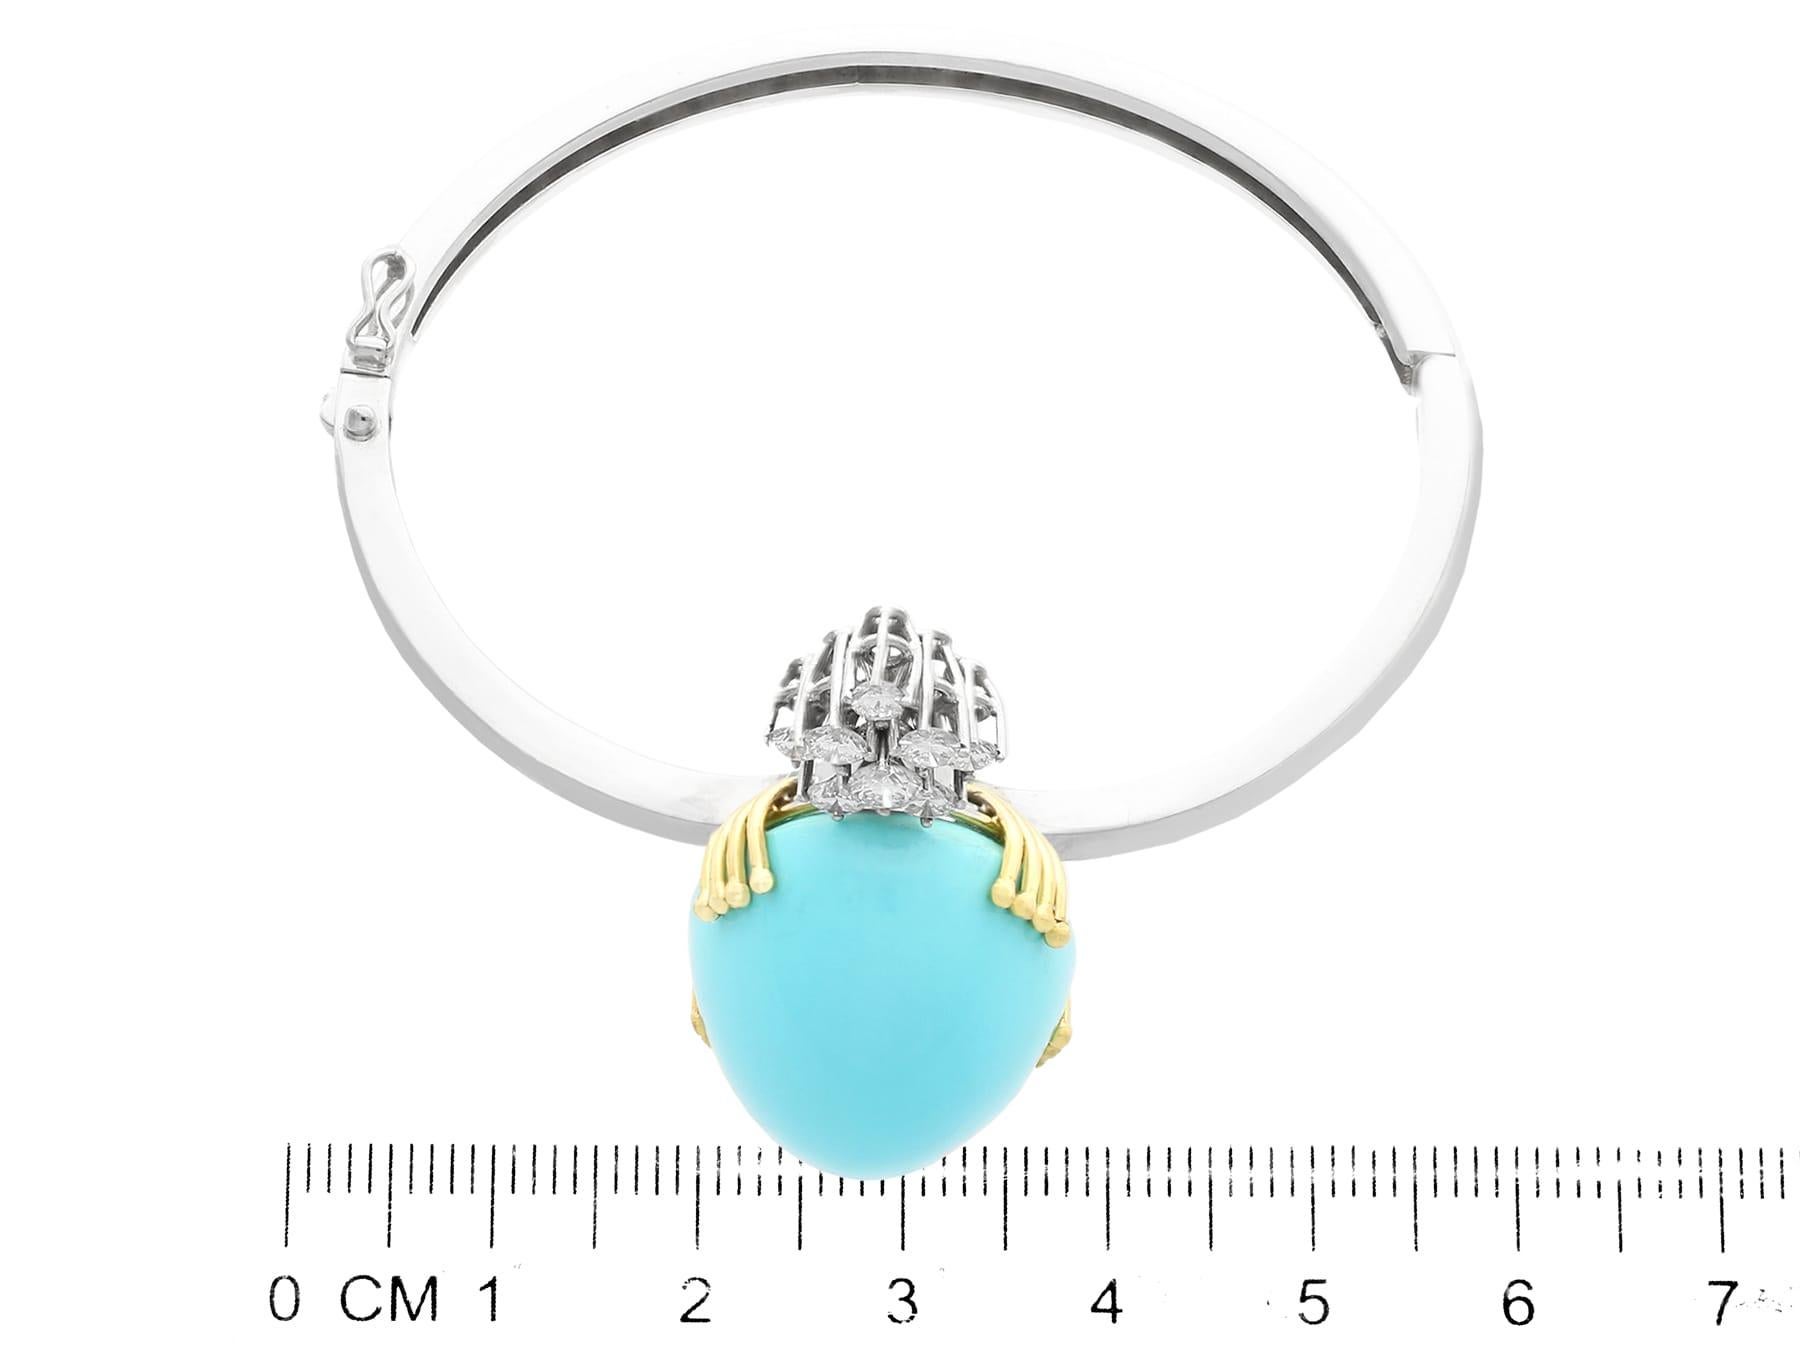 Vintage 43.44 Carat Cabochon Cut Turquoise and Diamond White Gold Bangle For Sale 4